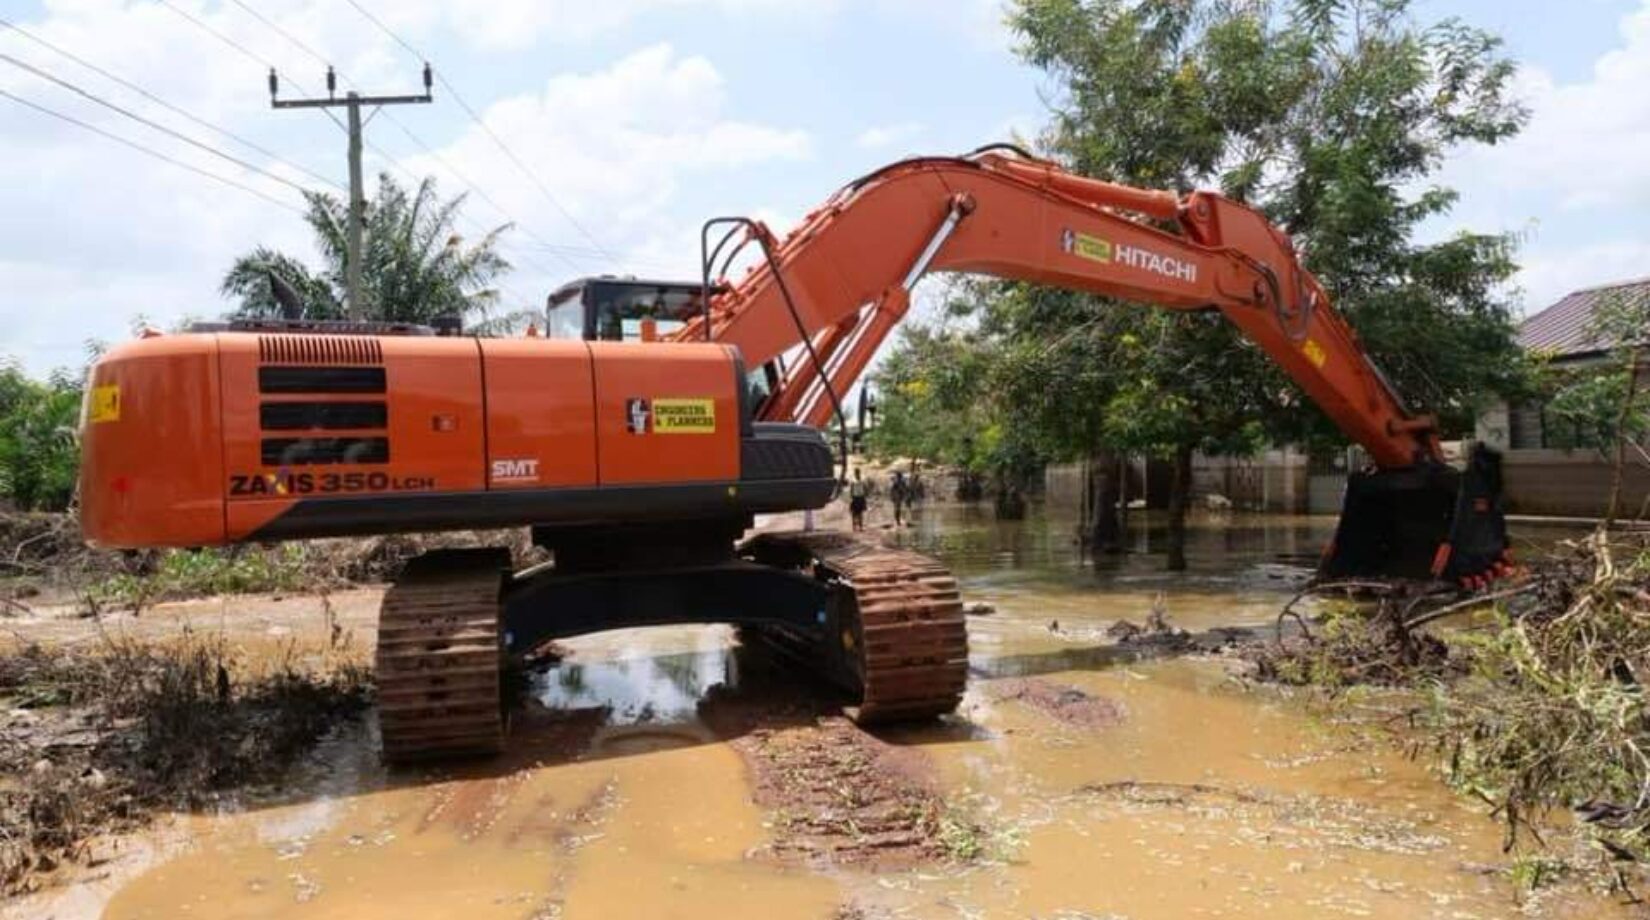 IBRAHIM MAHAMA GOES TO THE RESCUE OF MEPE COMMUNITY …AS HE DREDGES STAGNANT FLOOD WATERS: